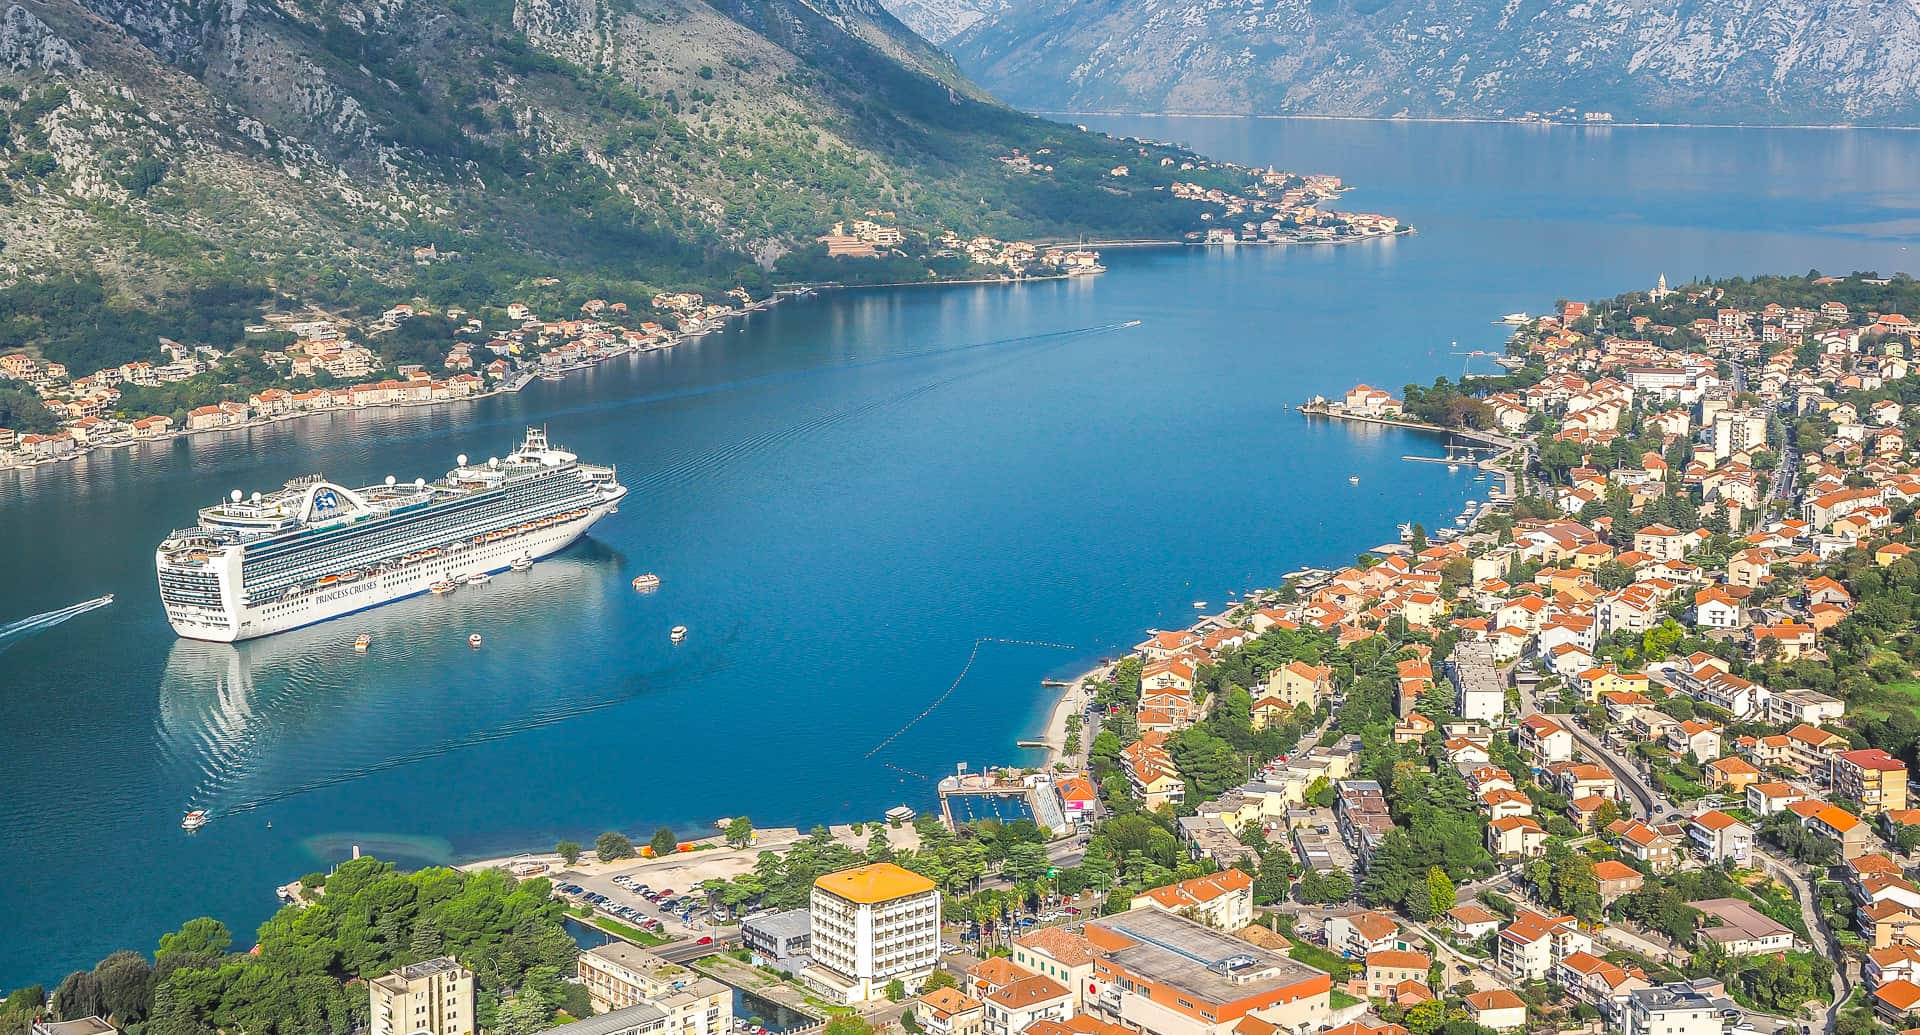 A detailed guide to Kotor Montenegro, including 15 things to do in Kotor